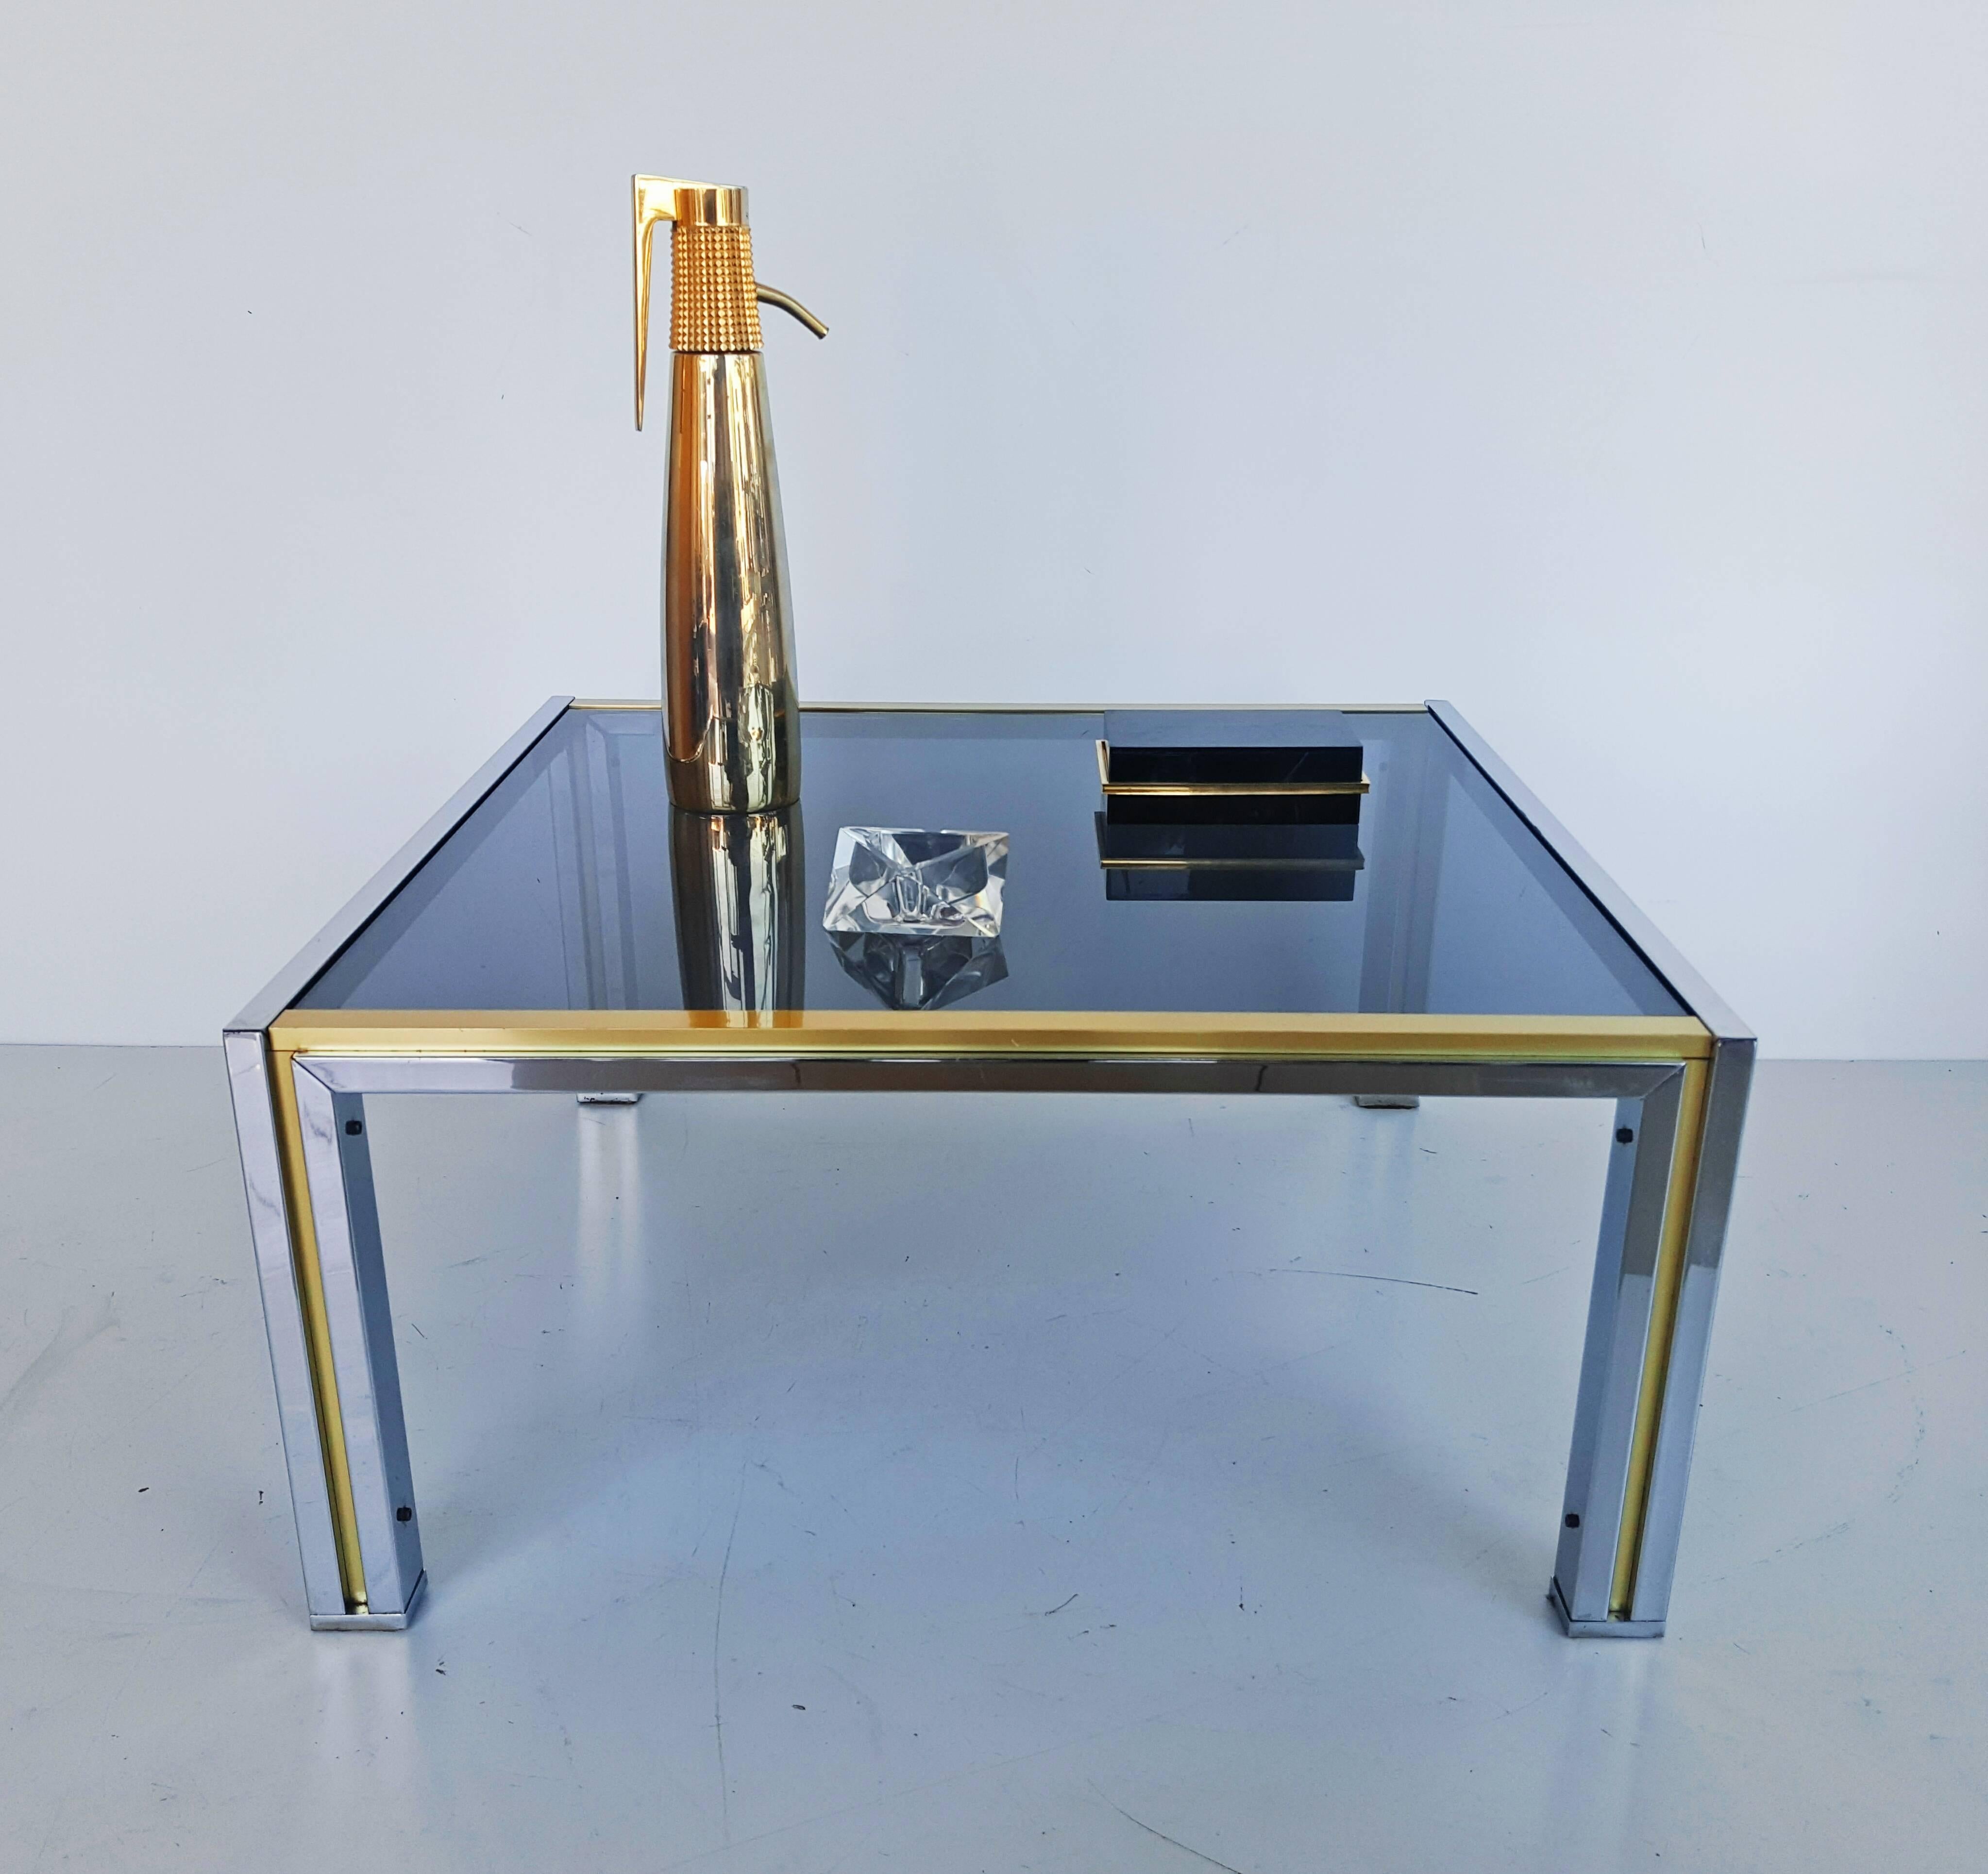 Beautiful Romeo Rega coffee table manufactured in Italy in the 1970s.
Chrome, glass and brass in very good vintage condition.